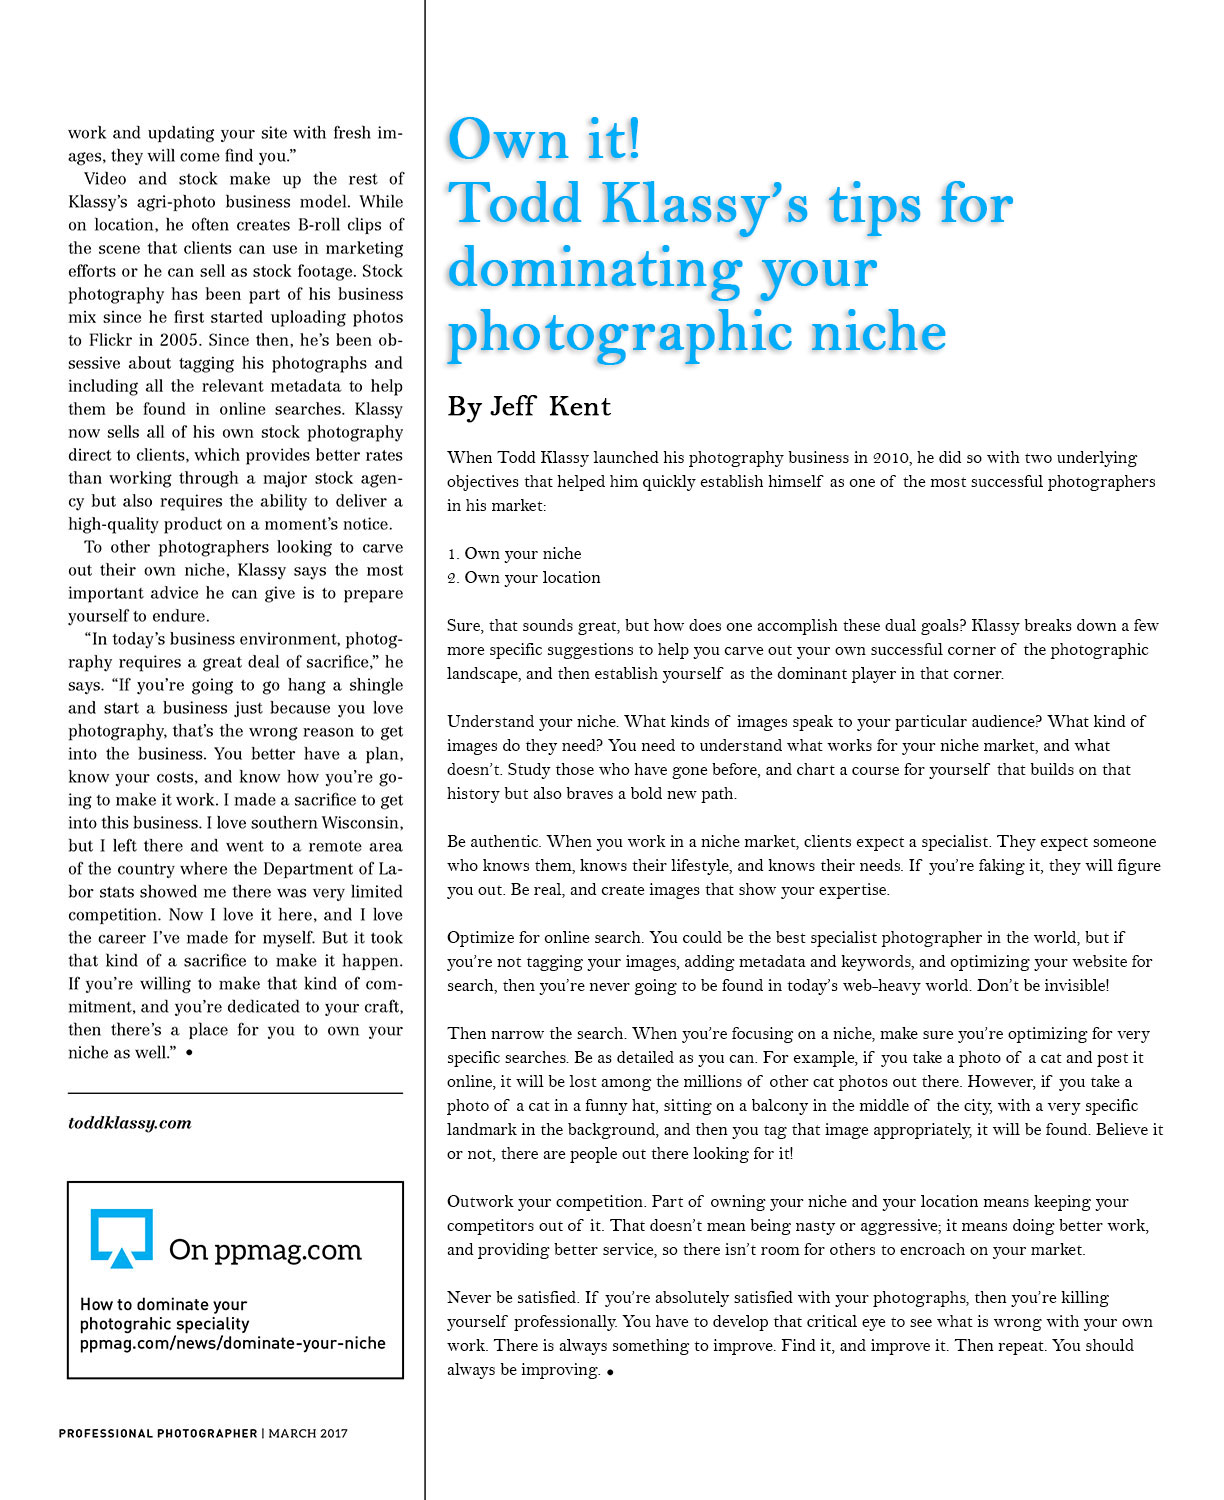 Farm and Ranch Photos Article in Professional Photographers Magazine